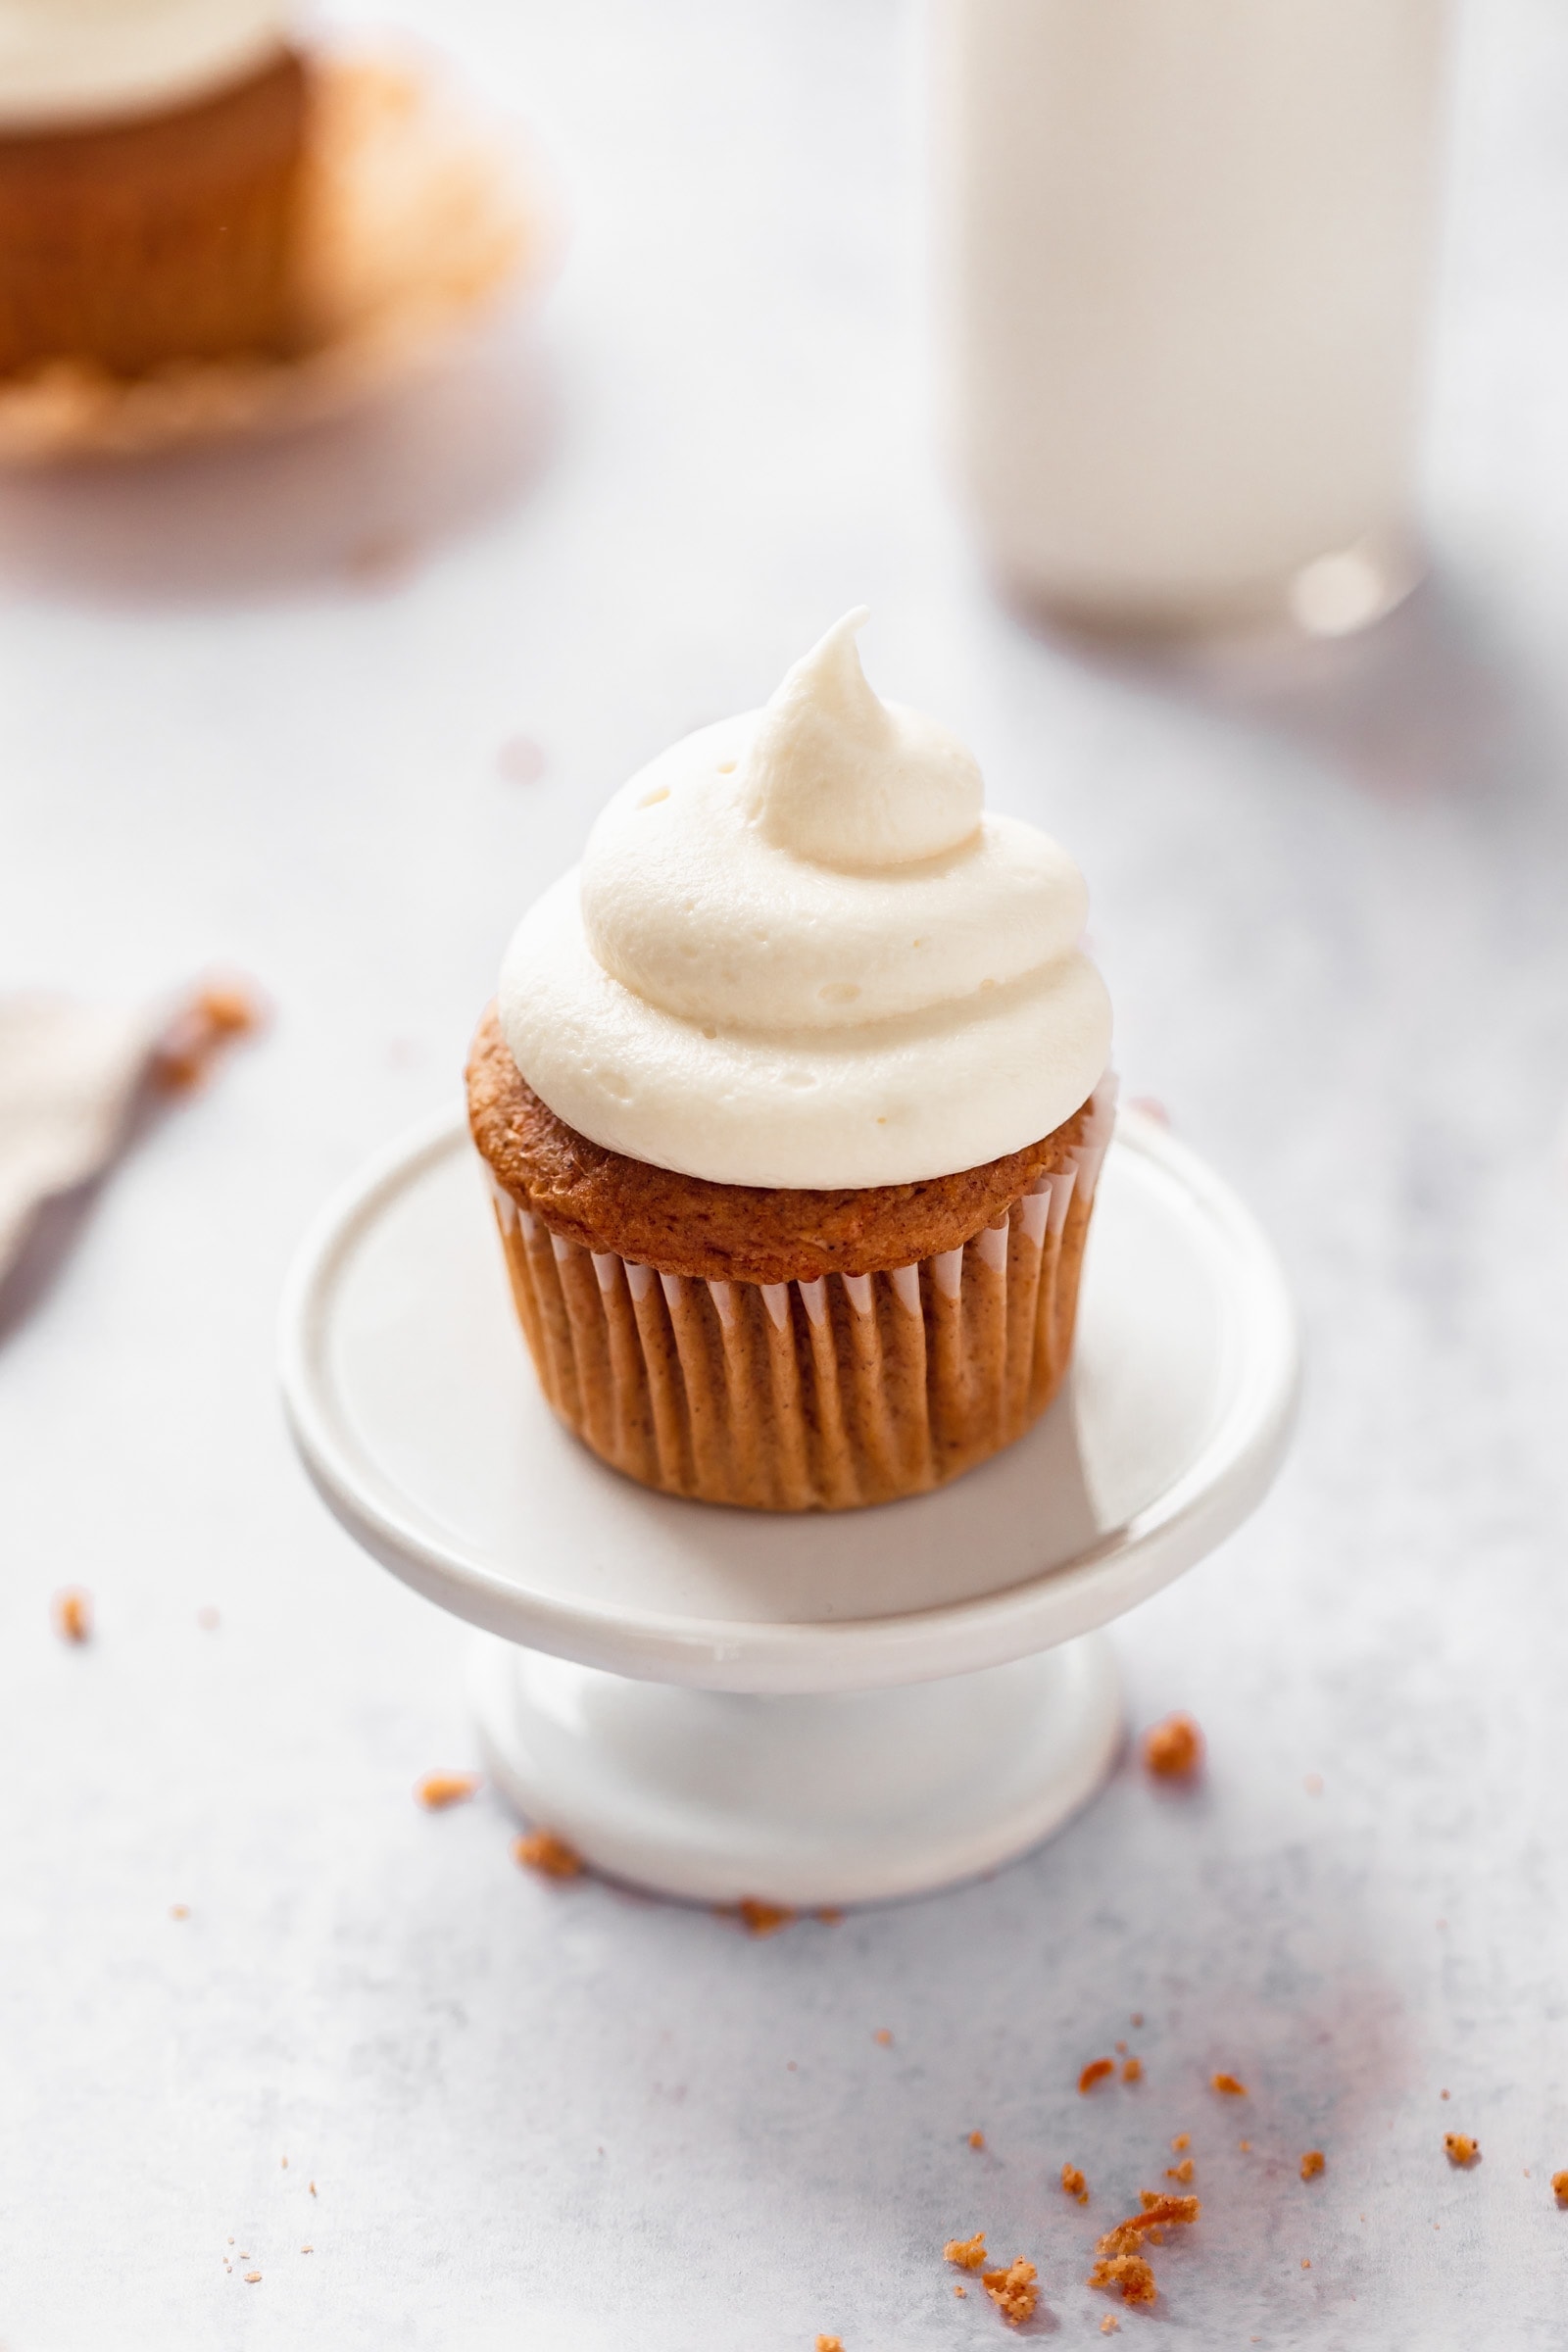 perfect fluffy cream cheese frosting on a carrot cake cupcake